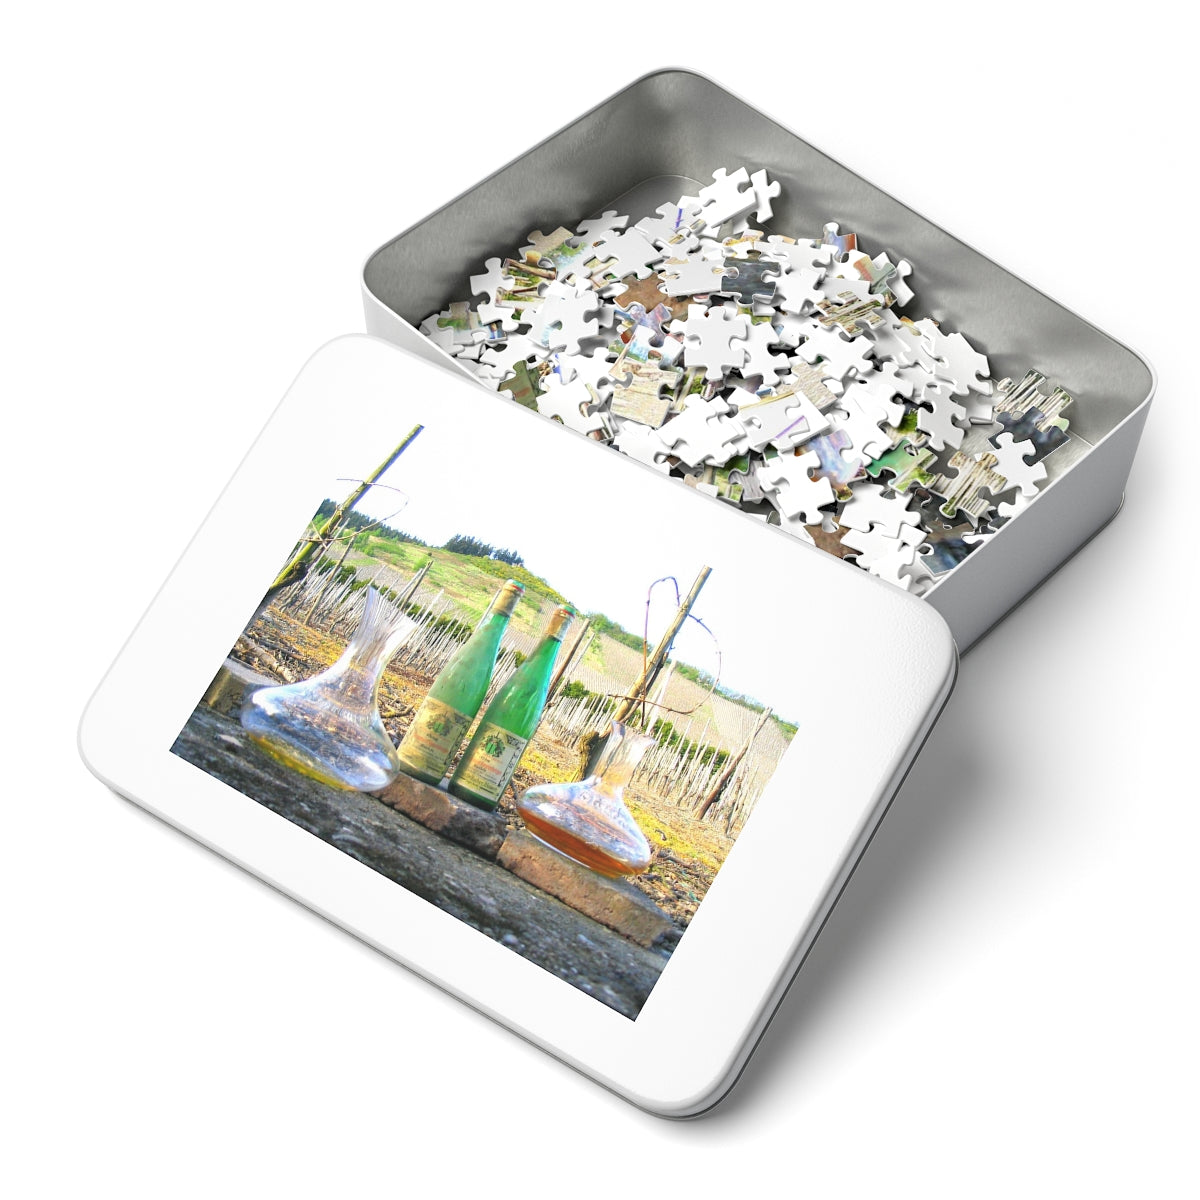 Mosel Jigsaw Puzzle (30, 110, 252, 500,1000-Piece)